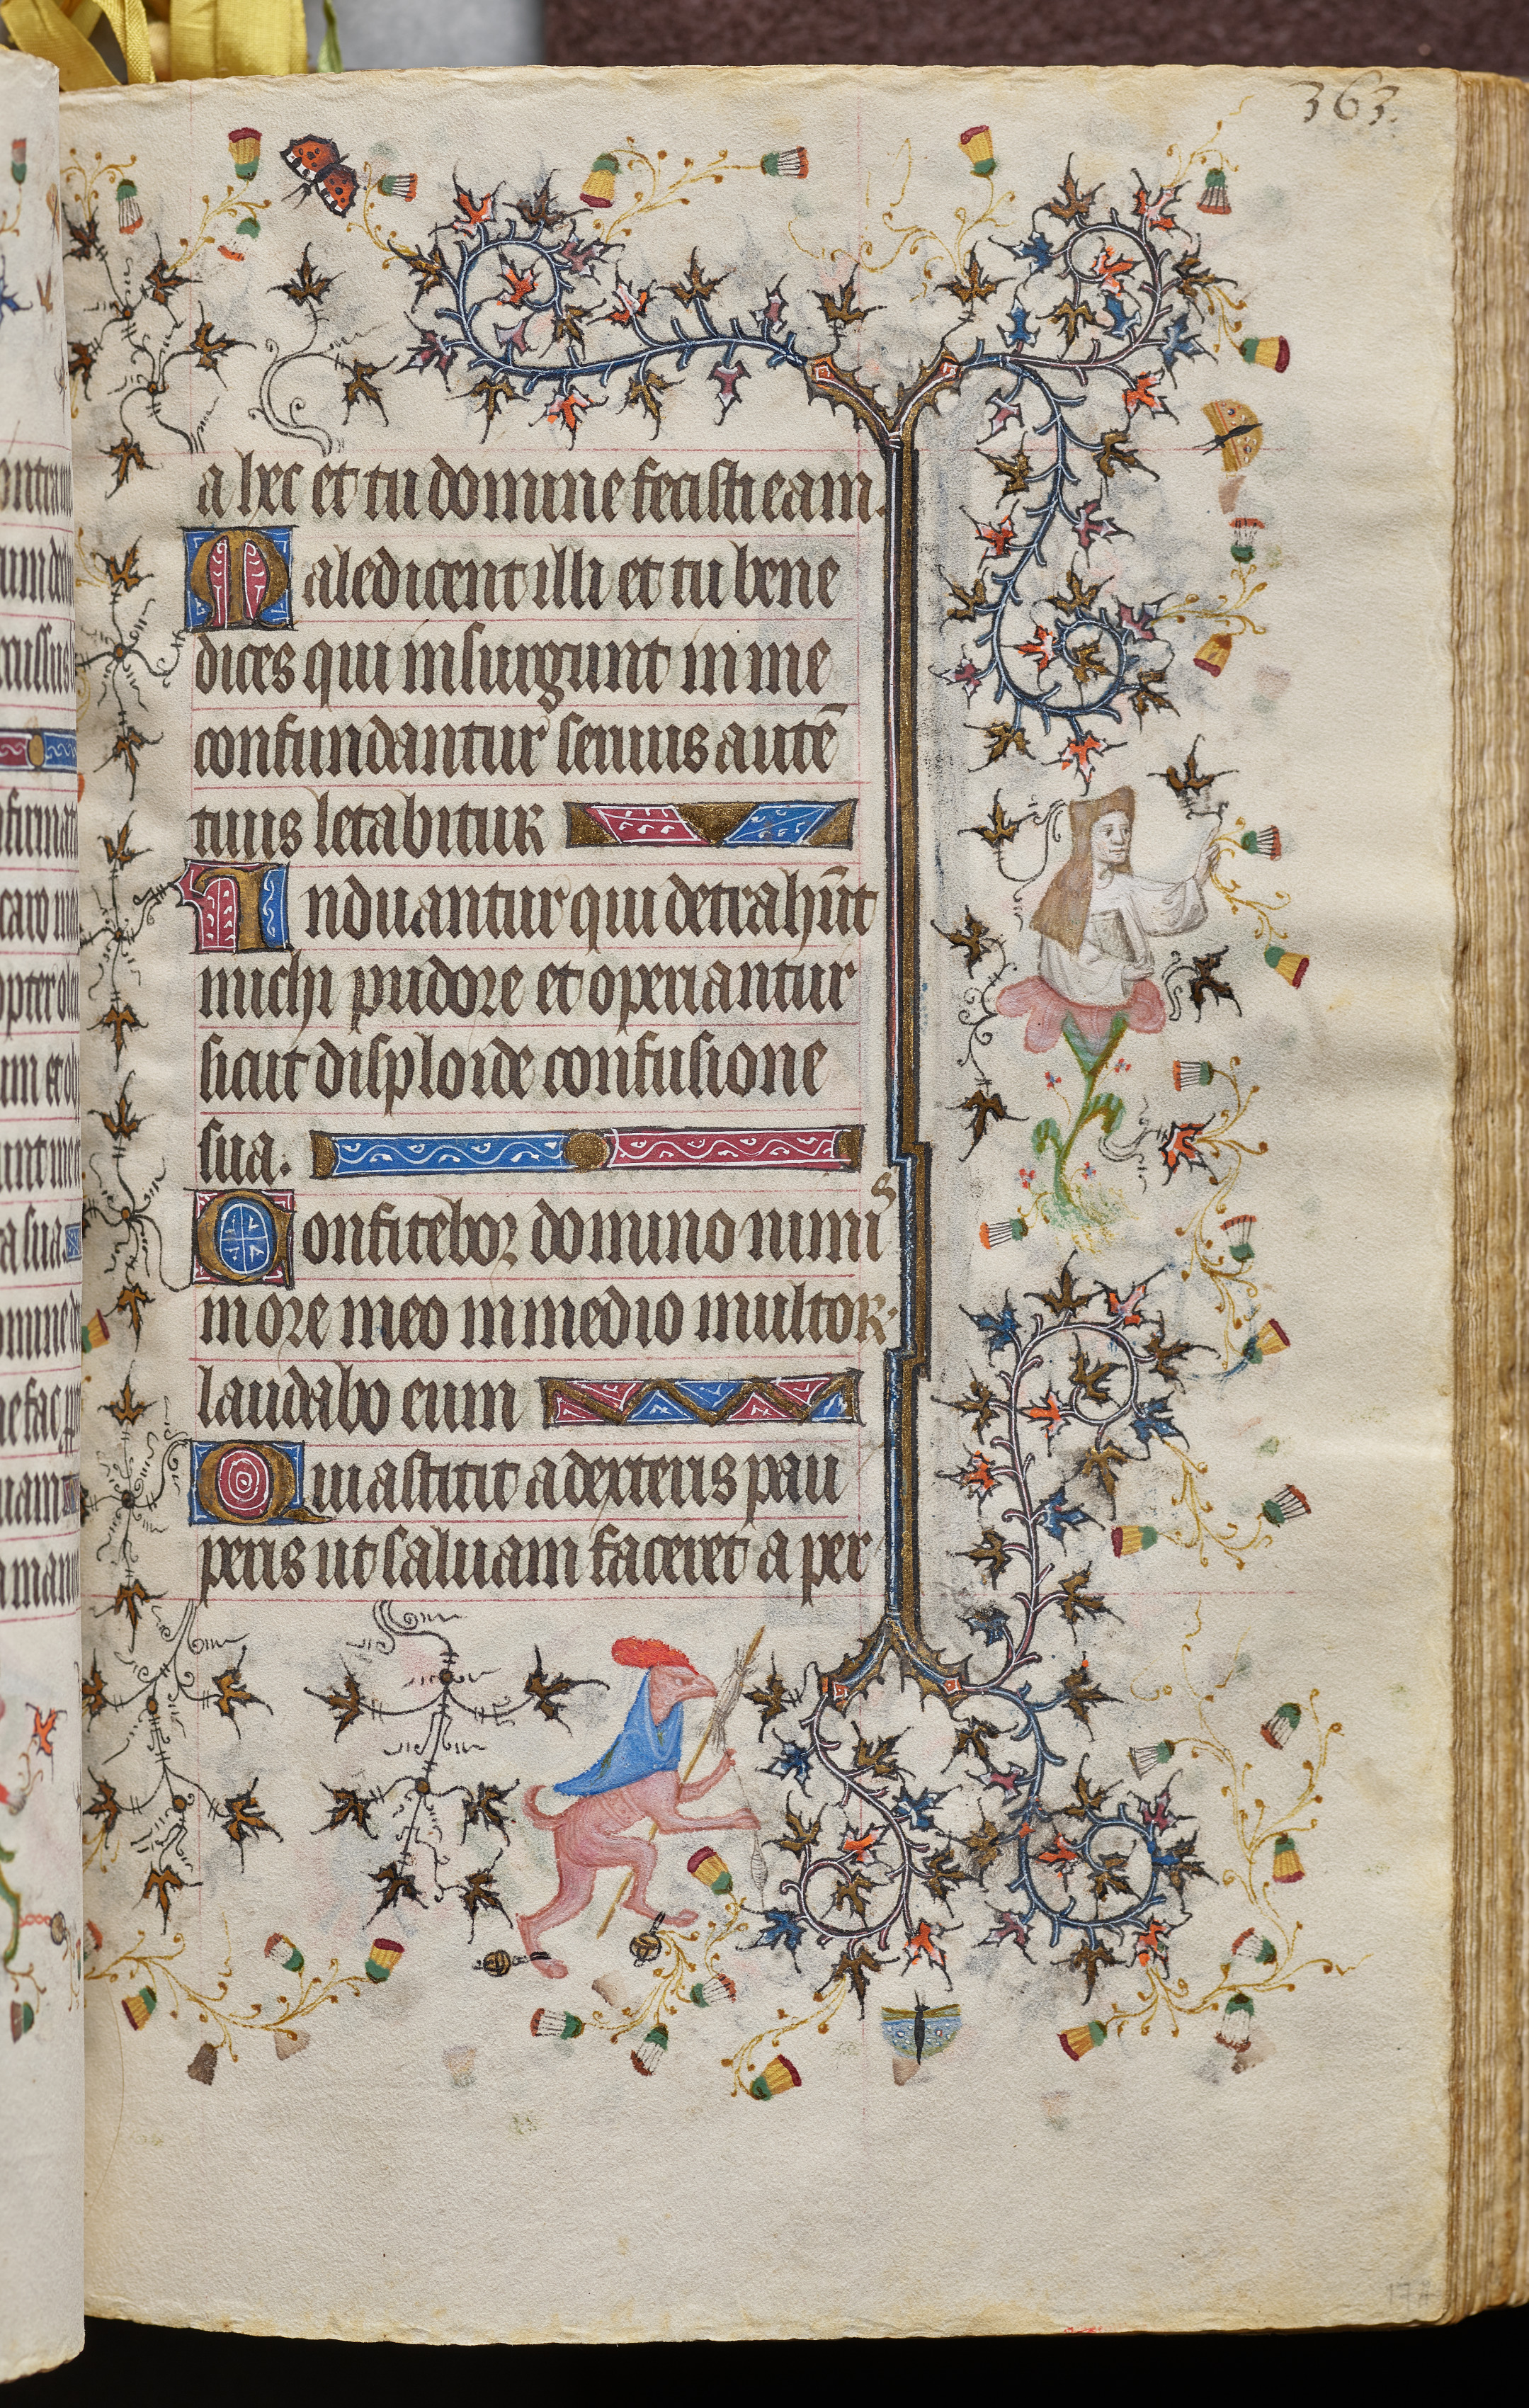 Hours of Charles the Noble, King of Navarre (1361-1425): fol. 177r, Text